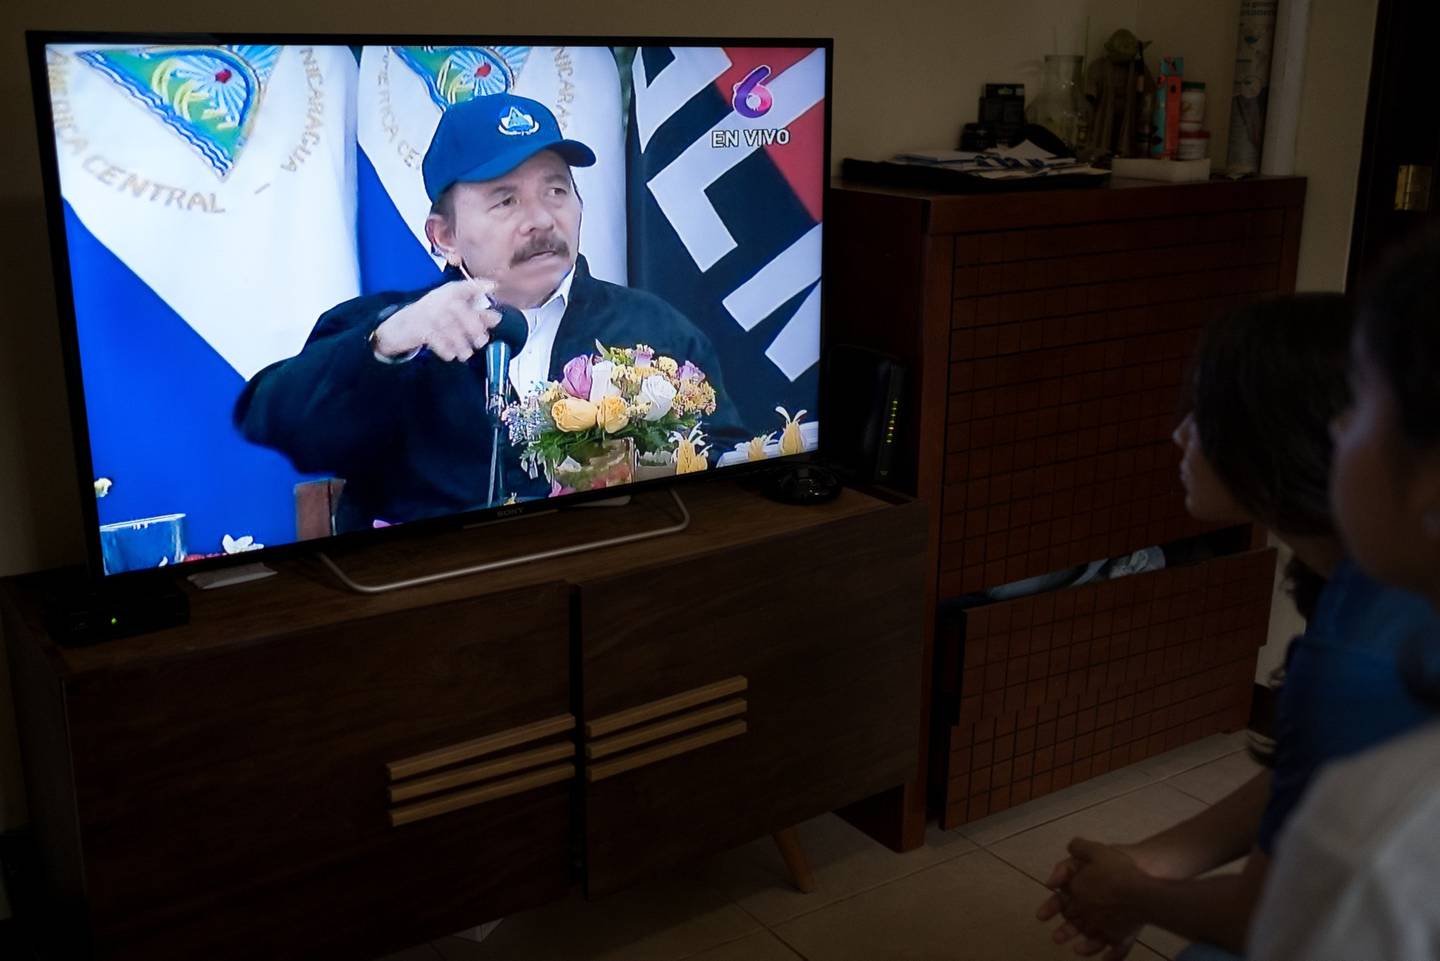 People listen as Daniel Ortega, Nicaragua's president, is shown on a screen during a televised national address in this arranged photograph in Managua, Nicaragua, on Wednesday, April 15, 2020. Ortega defended the nation's relatively relaxed measures for confronting the coronavirus pandemic, in his first public appearance in more than a month. Photographer: Carlos Herrera/Bloomberg